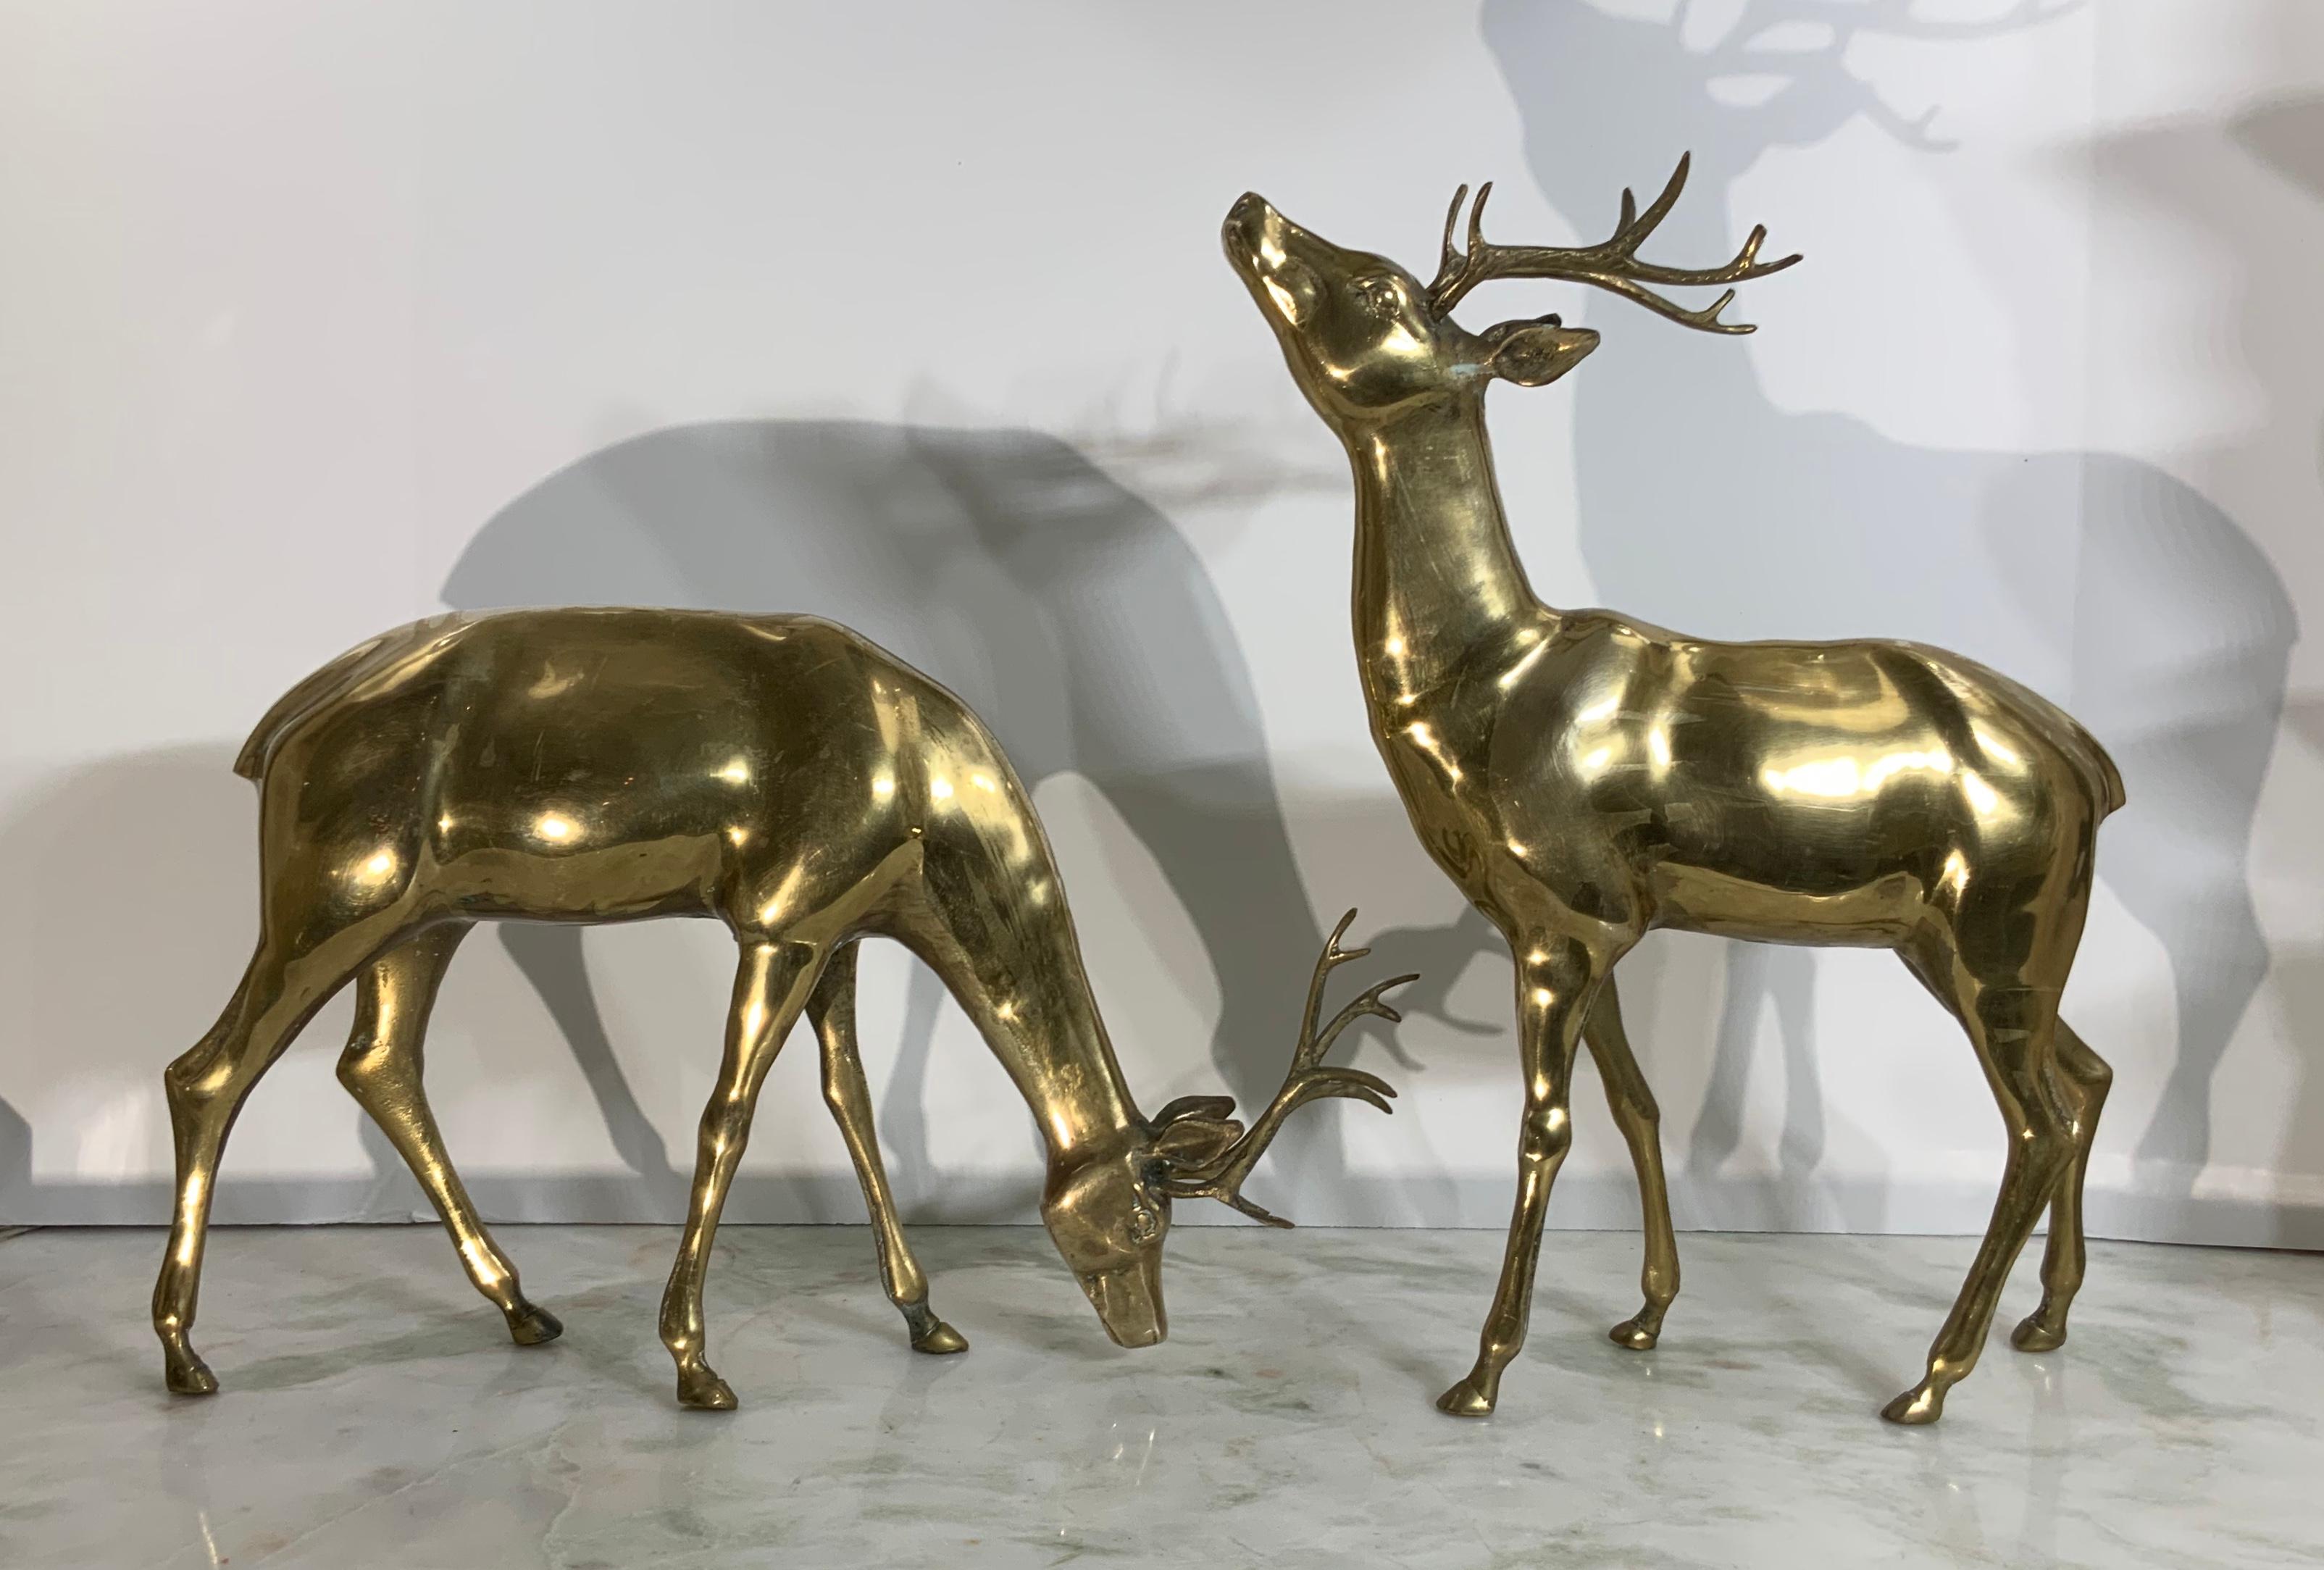 Elegant pair of deer made of solid brass, great decorative pair for a table of consul top.
Sizes: 3” deep x 12” wide x 14” high
3” deep x 15” wide x 9”.5 high
Priced for the two.